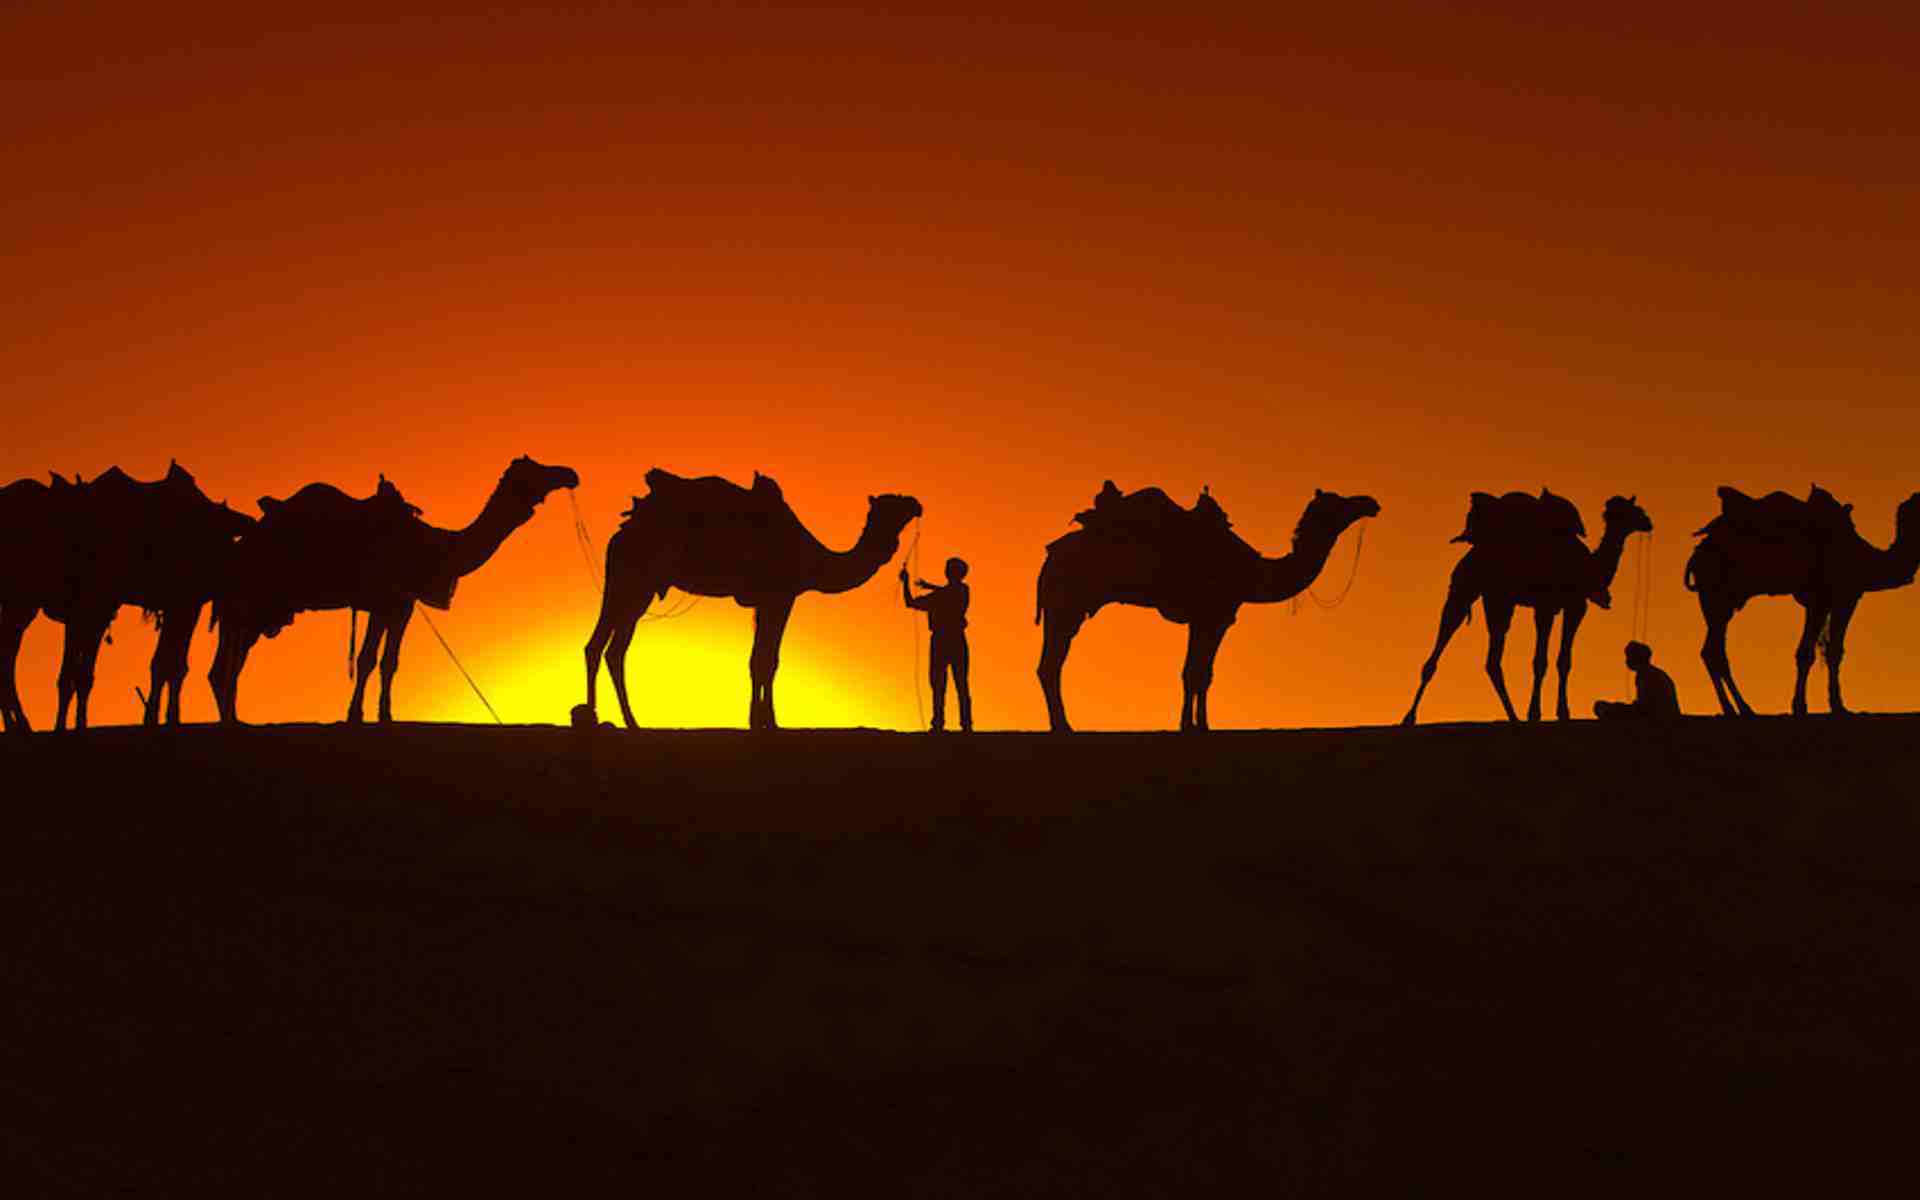 Shadows Of Camels Background